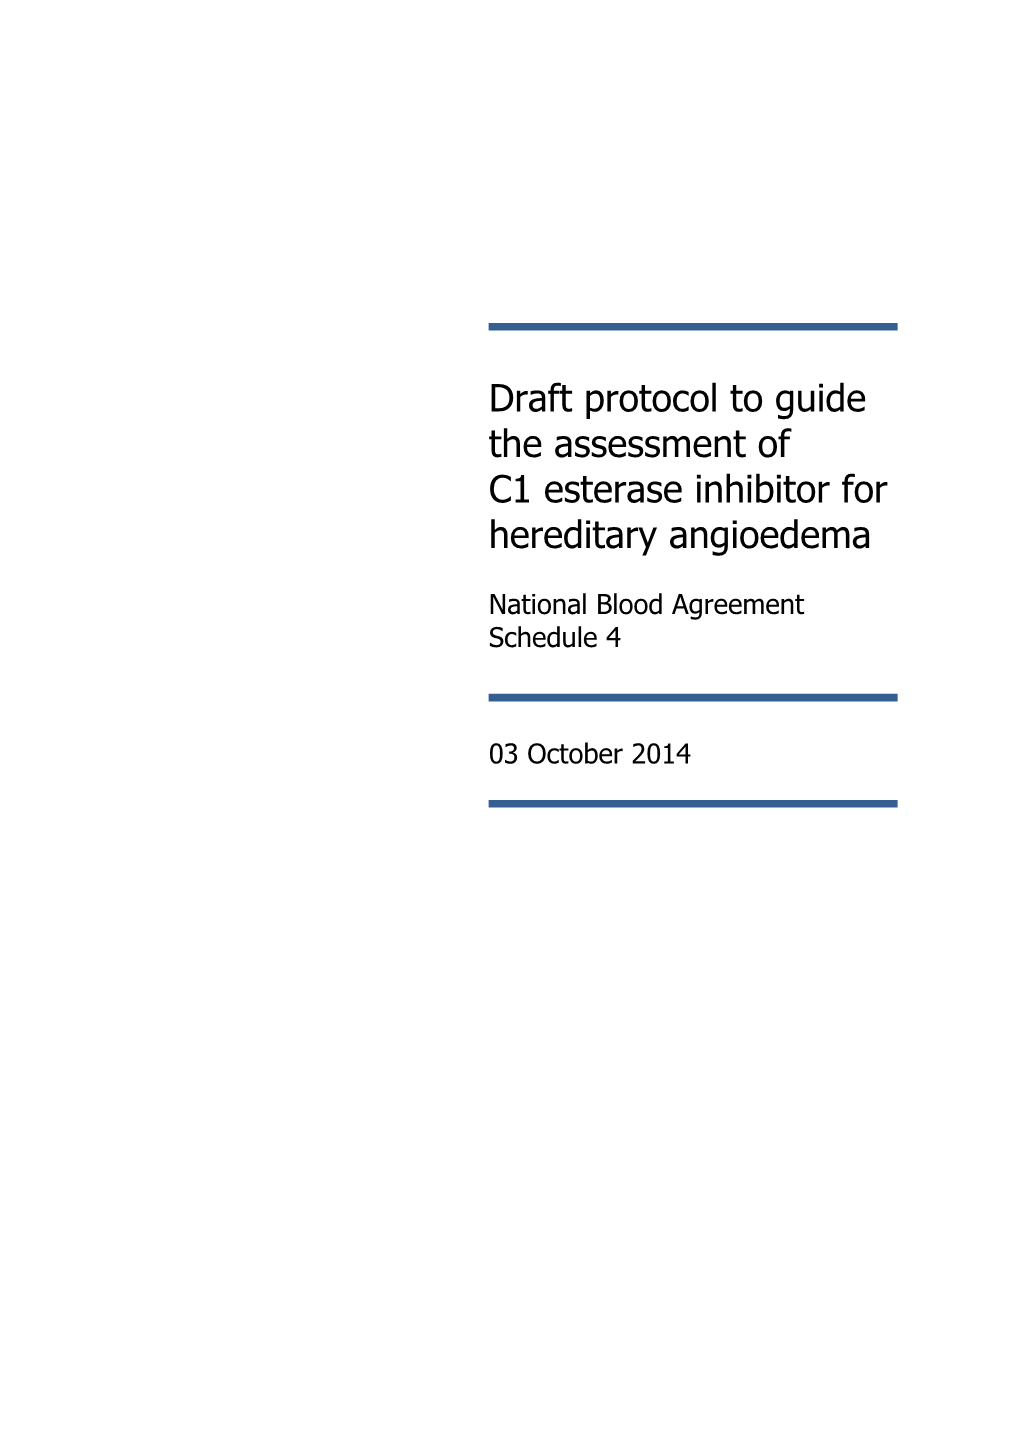 Draft Protocol to Guide the Assessment of C1esterase Inhibitor for Hereditary Angioedema